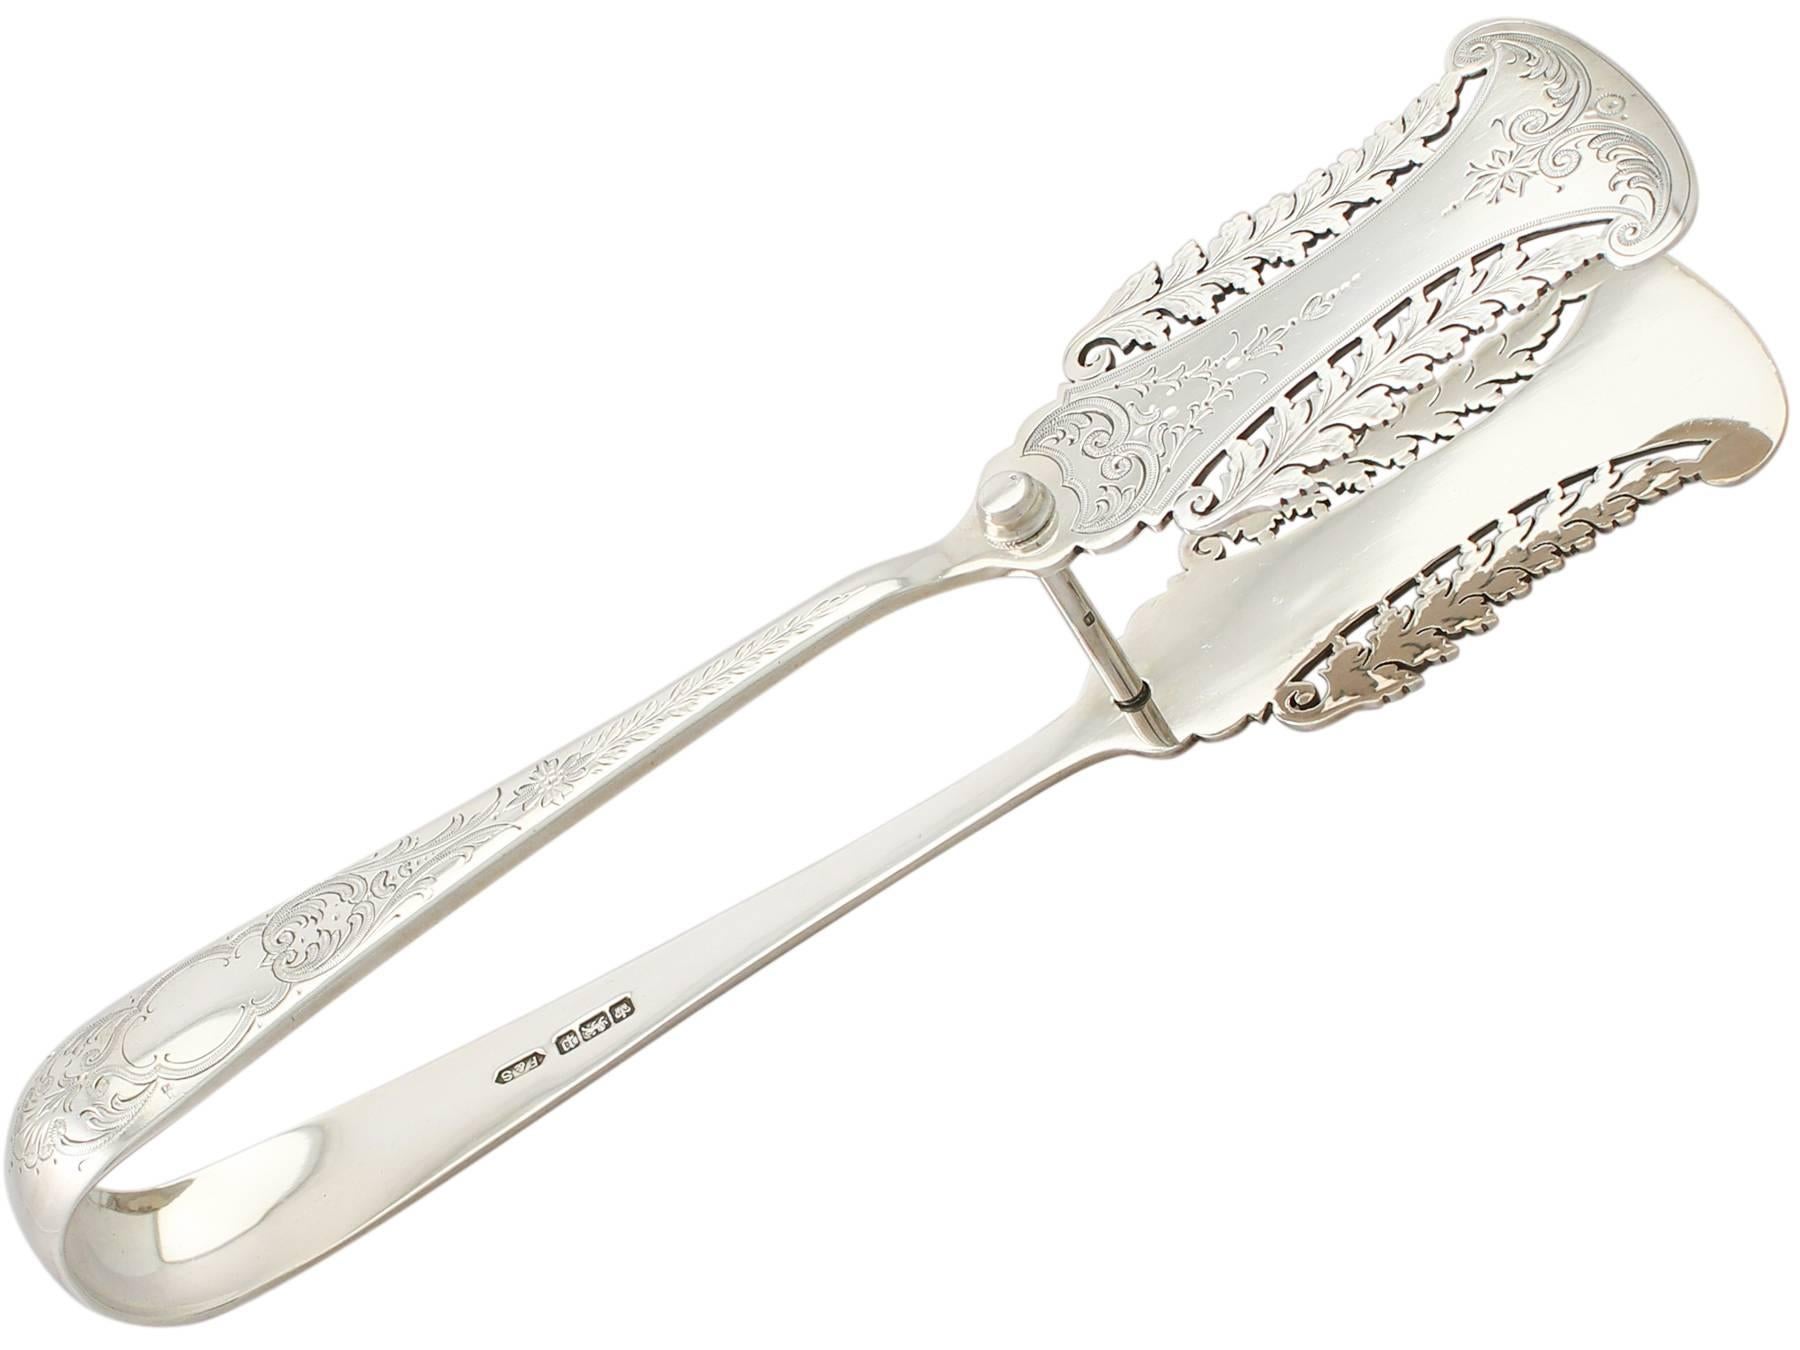 A fine pair of antique Edwardian English sterling silver serving tongs; an addition to our silverware collection

These fine antique Edwardian sterling silver serving tongs have a rounded rectangular form.

The shaped blades of these silver